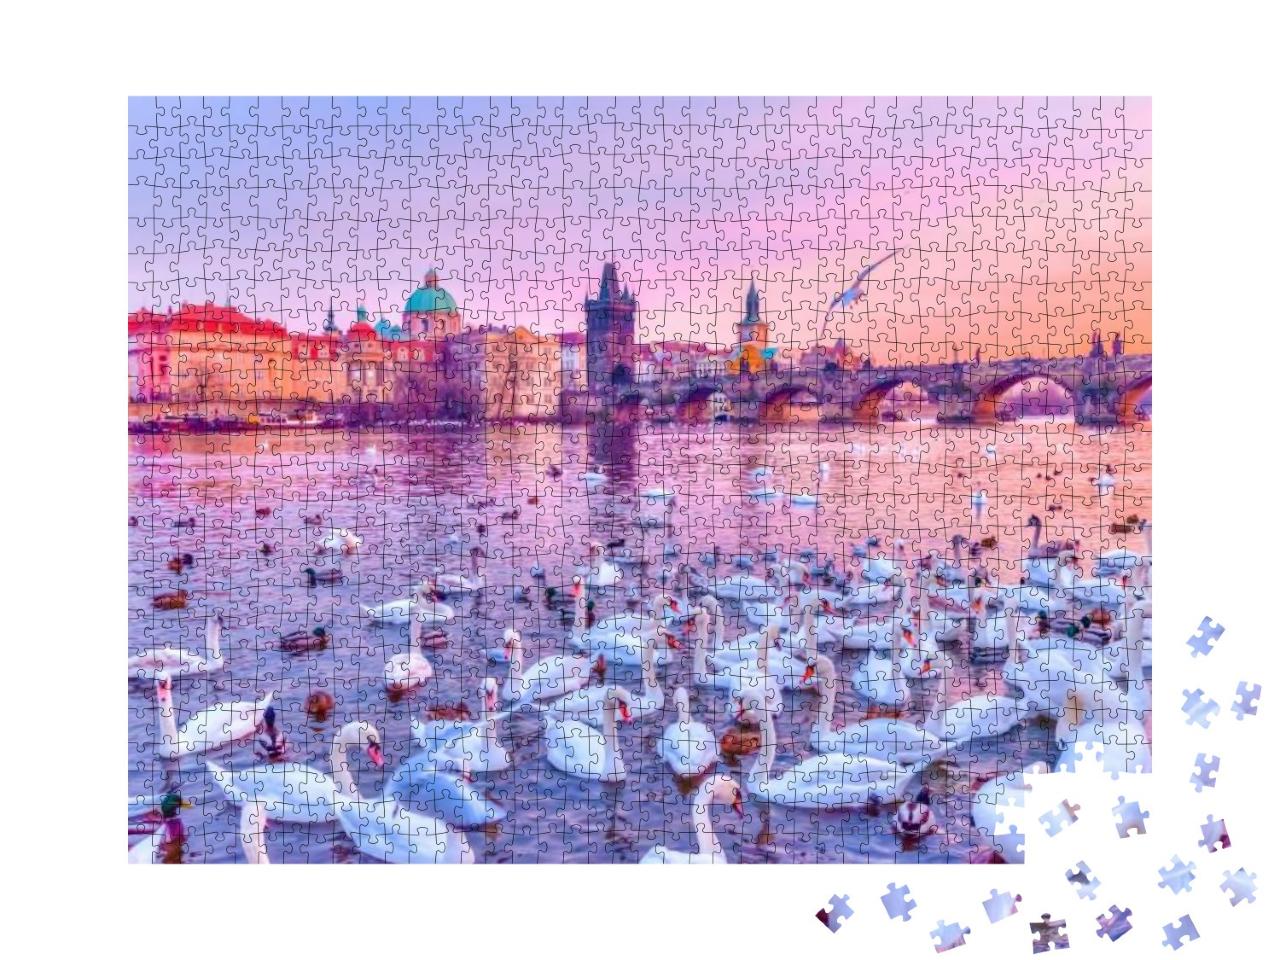 Swans on Vltava River, Towers & Charles Bridge At Sunset... Jigsaw Puzzle with 1000 pieces